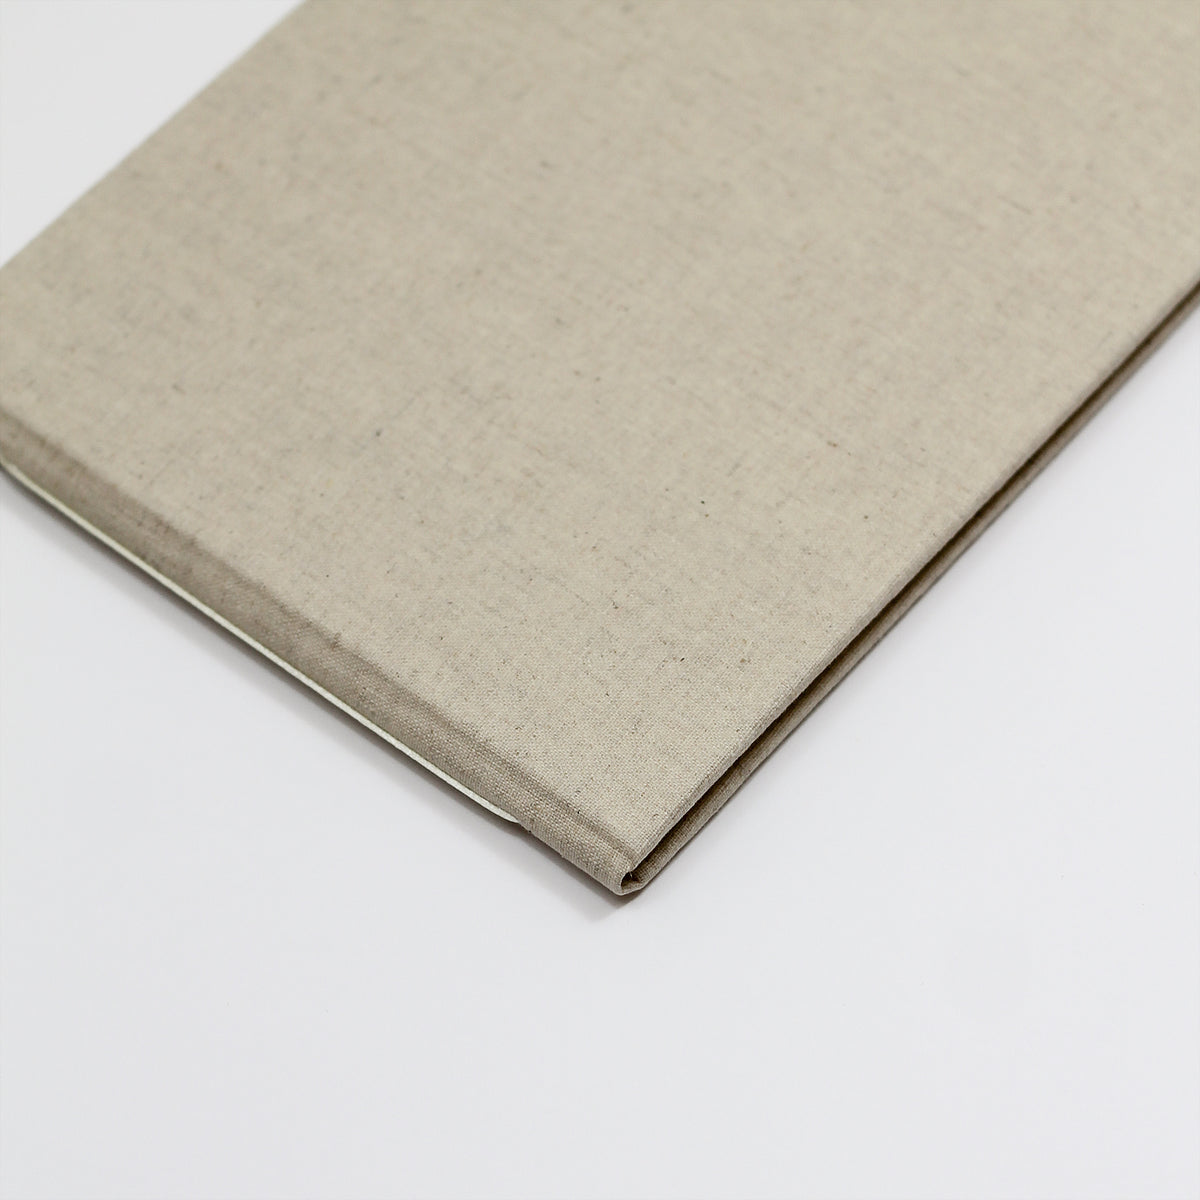 Guestbook with Natural Linen Cover